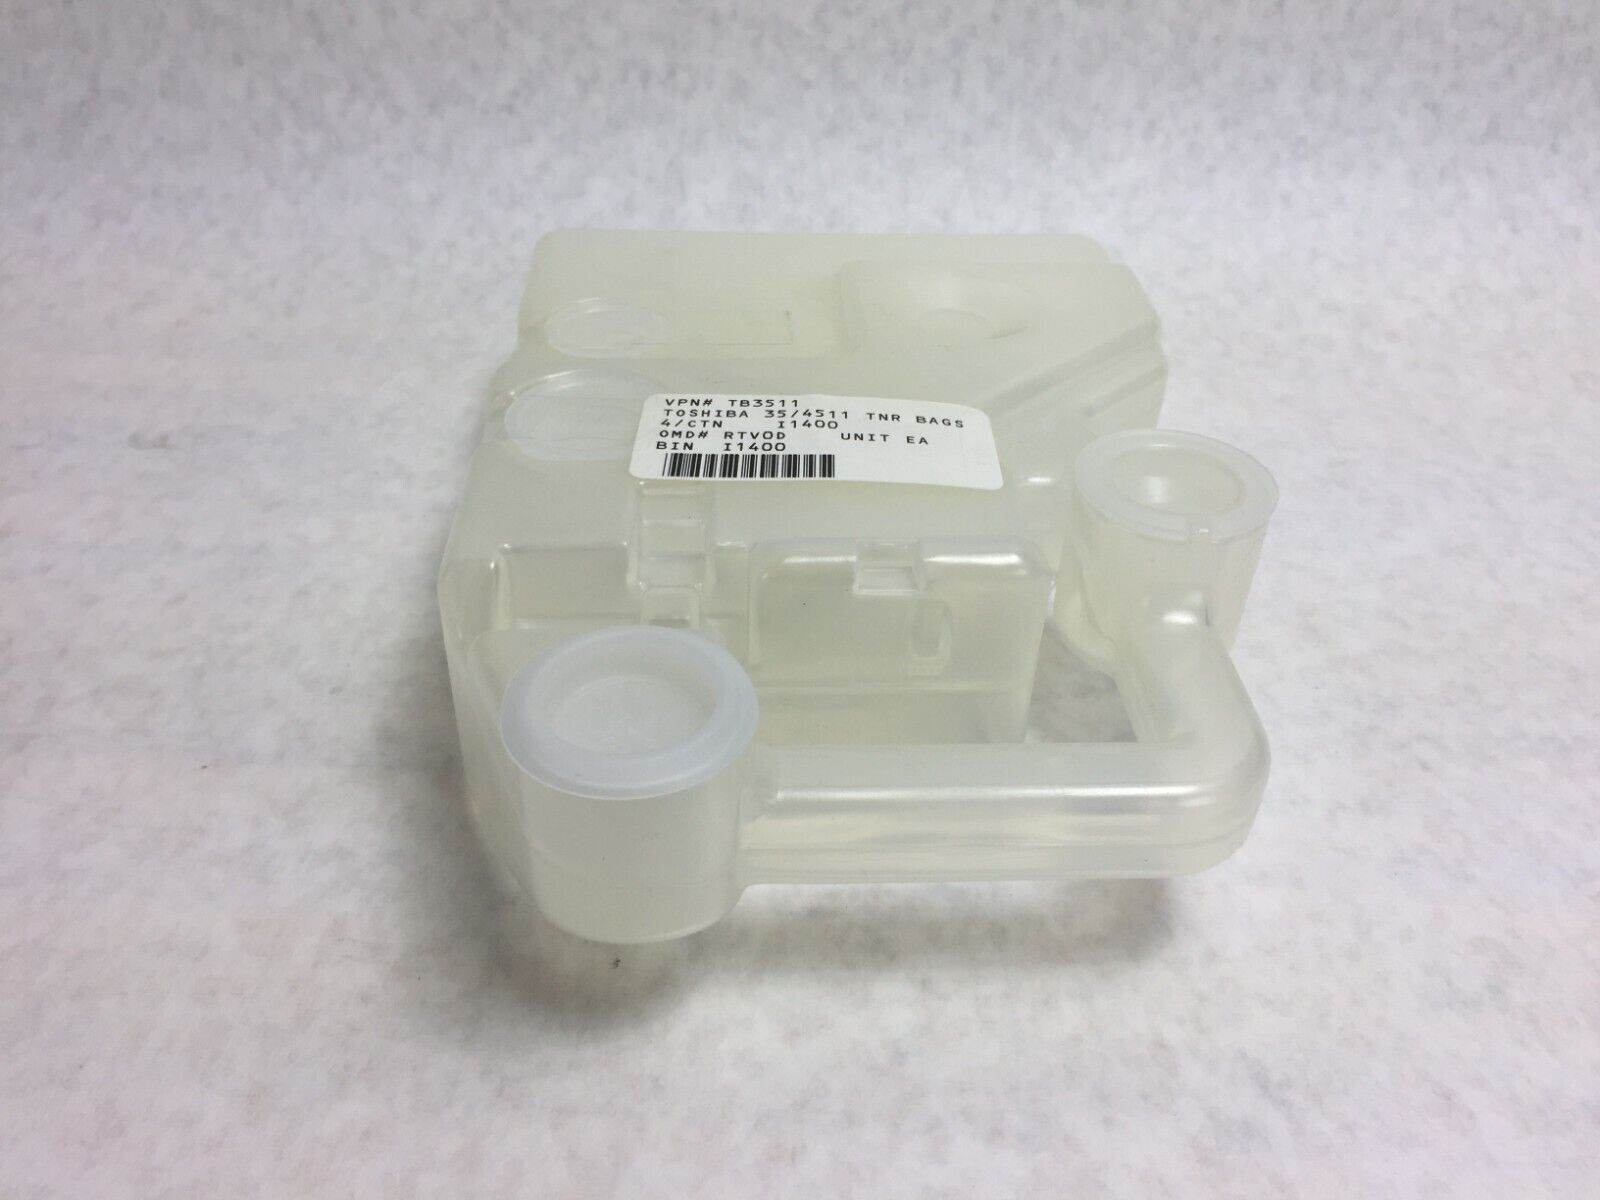 OEM Toshiba TB3511 Waste Container